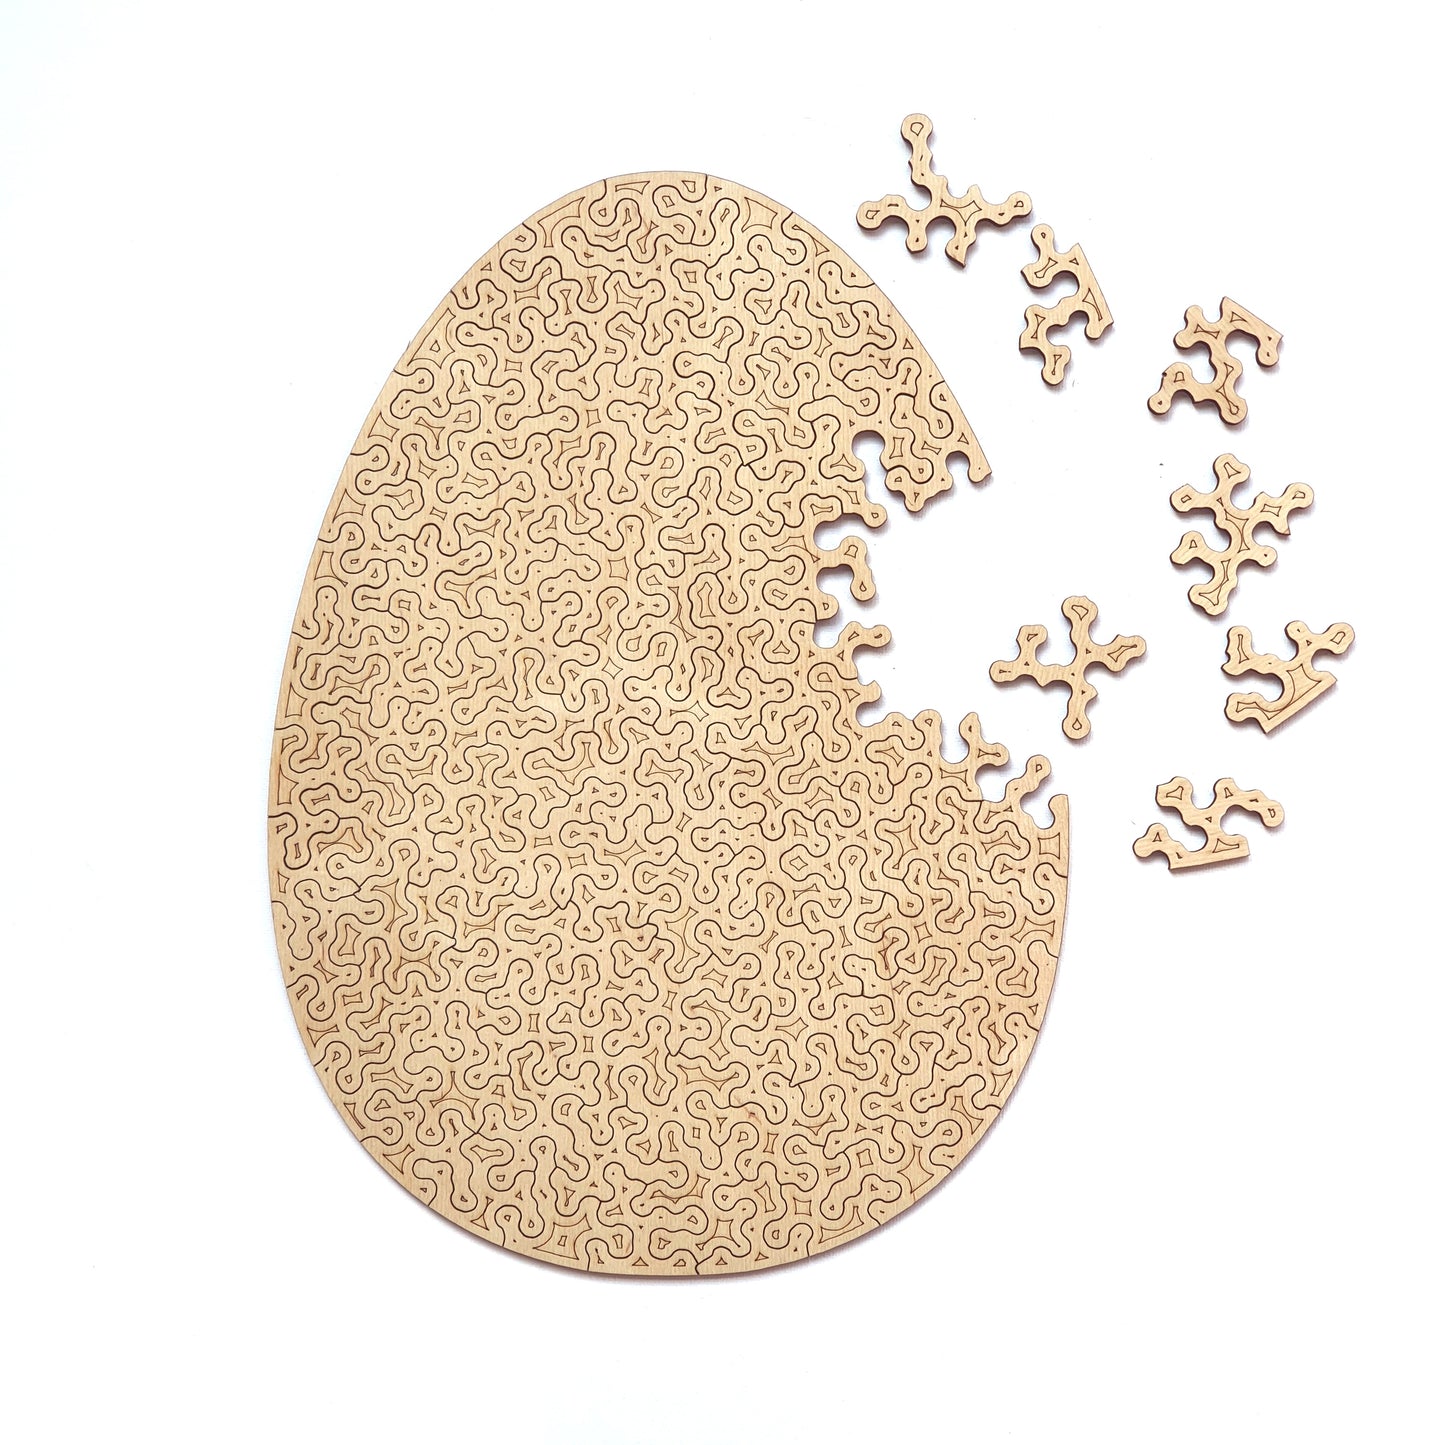 Egg | Wooden Puzzle | Chaos series - 100 pieces